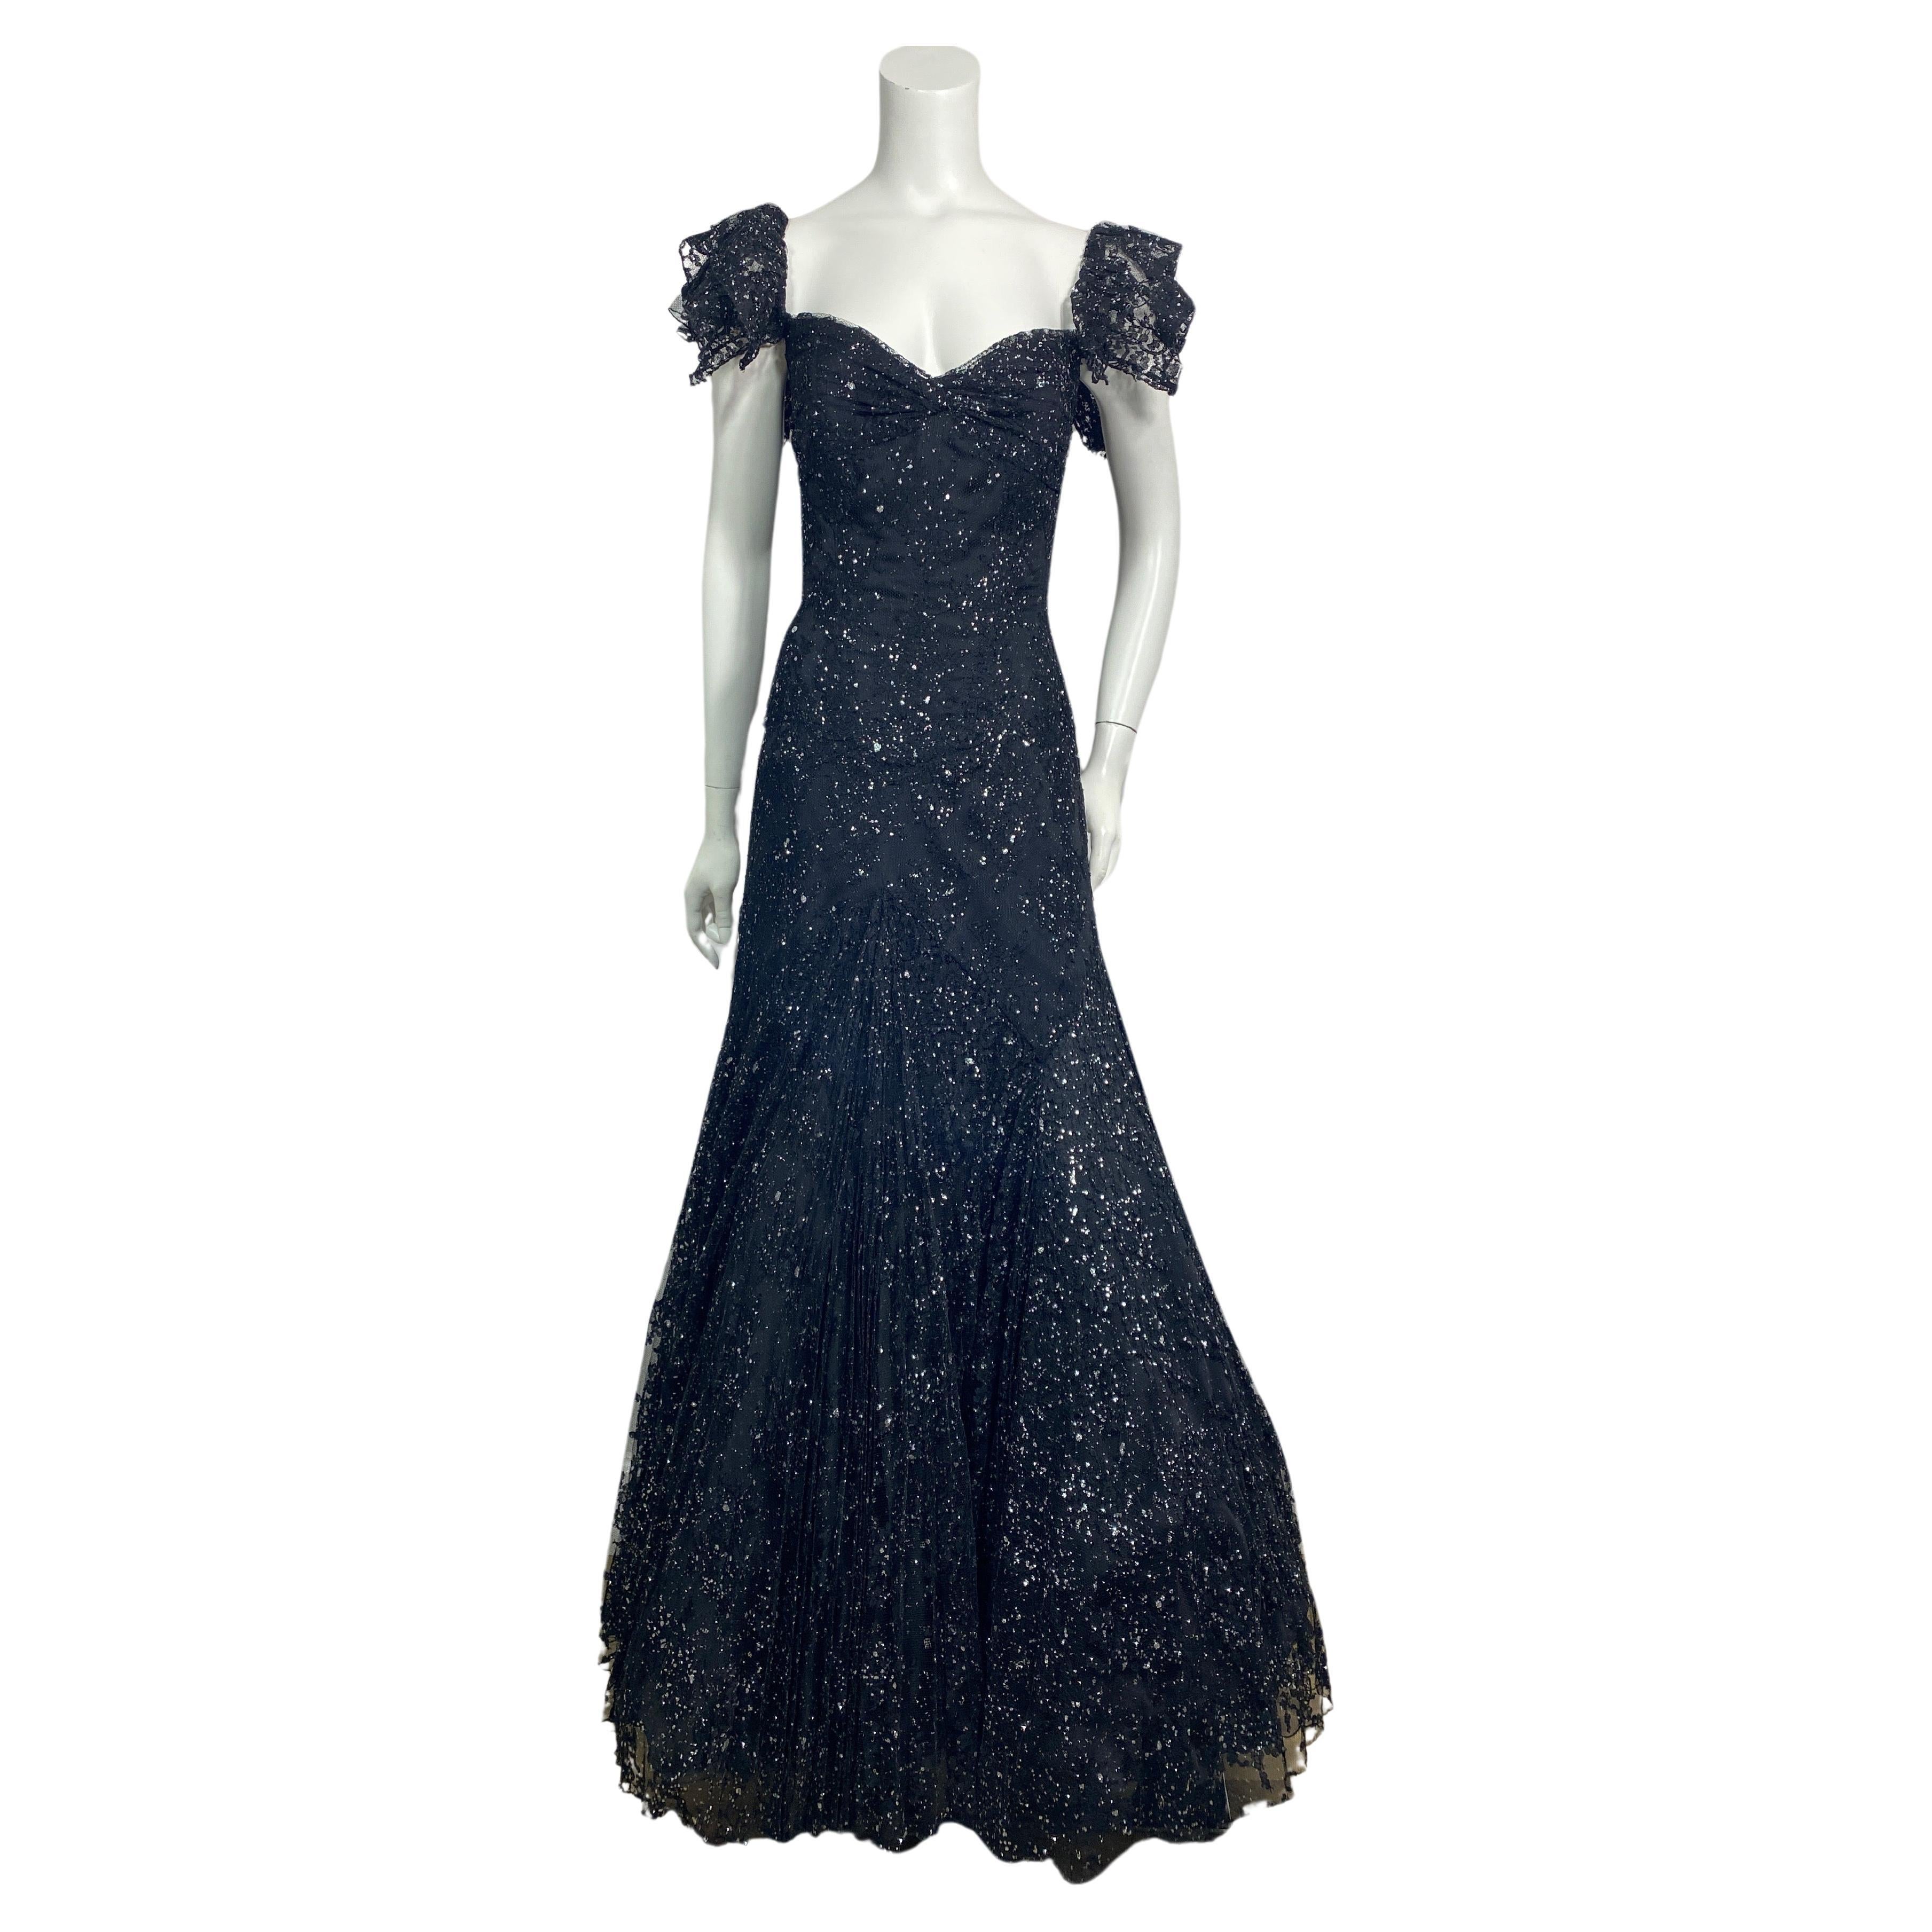 Vicky Tiel Black and Silver Tulle Lace Off the Shoulder Gown - 42